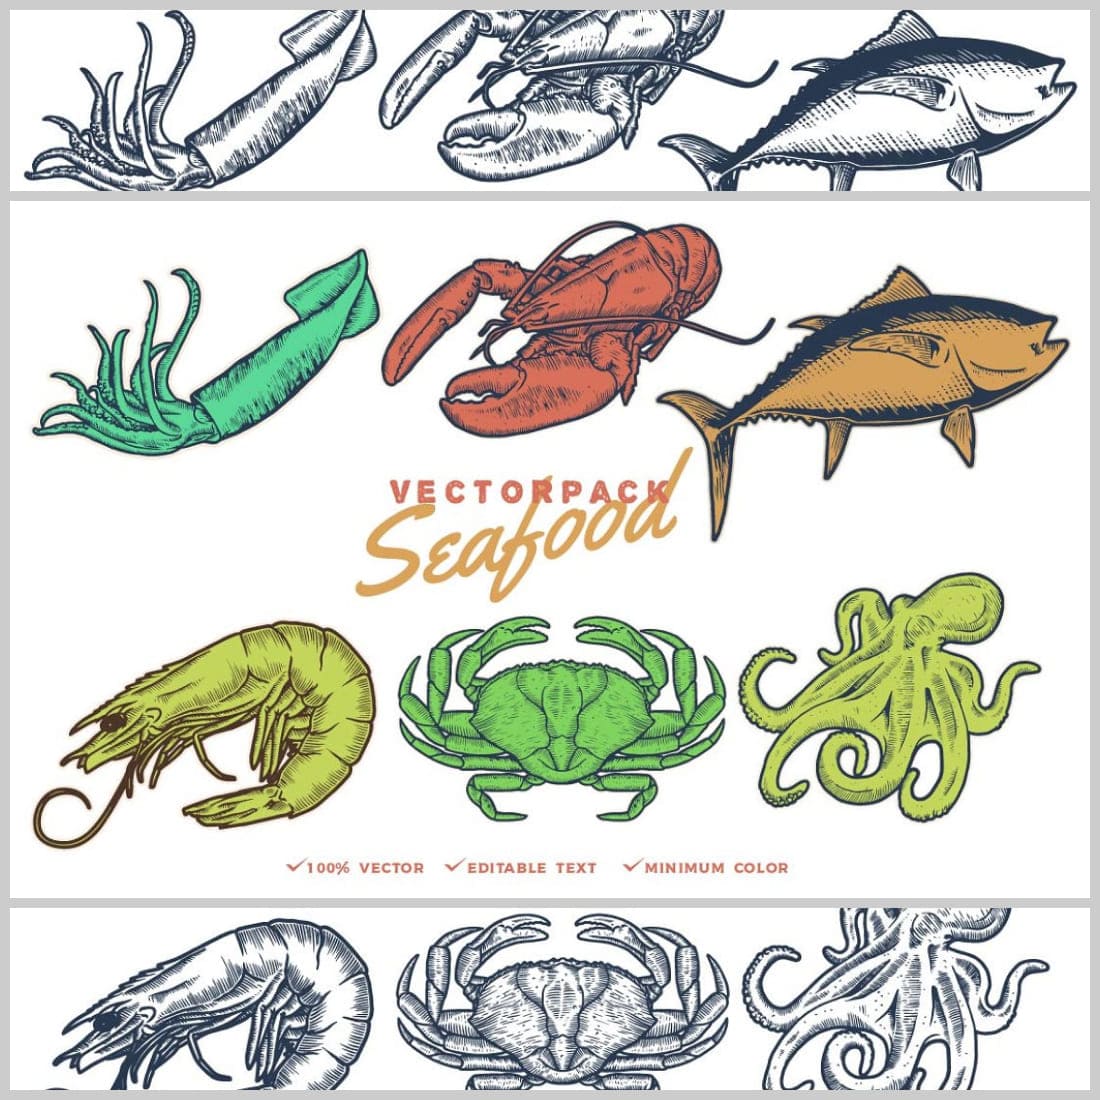 Seafood Vectorpack cover image.